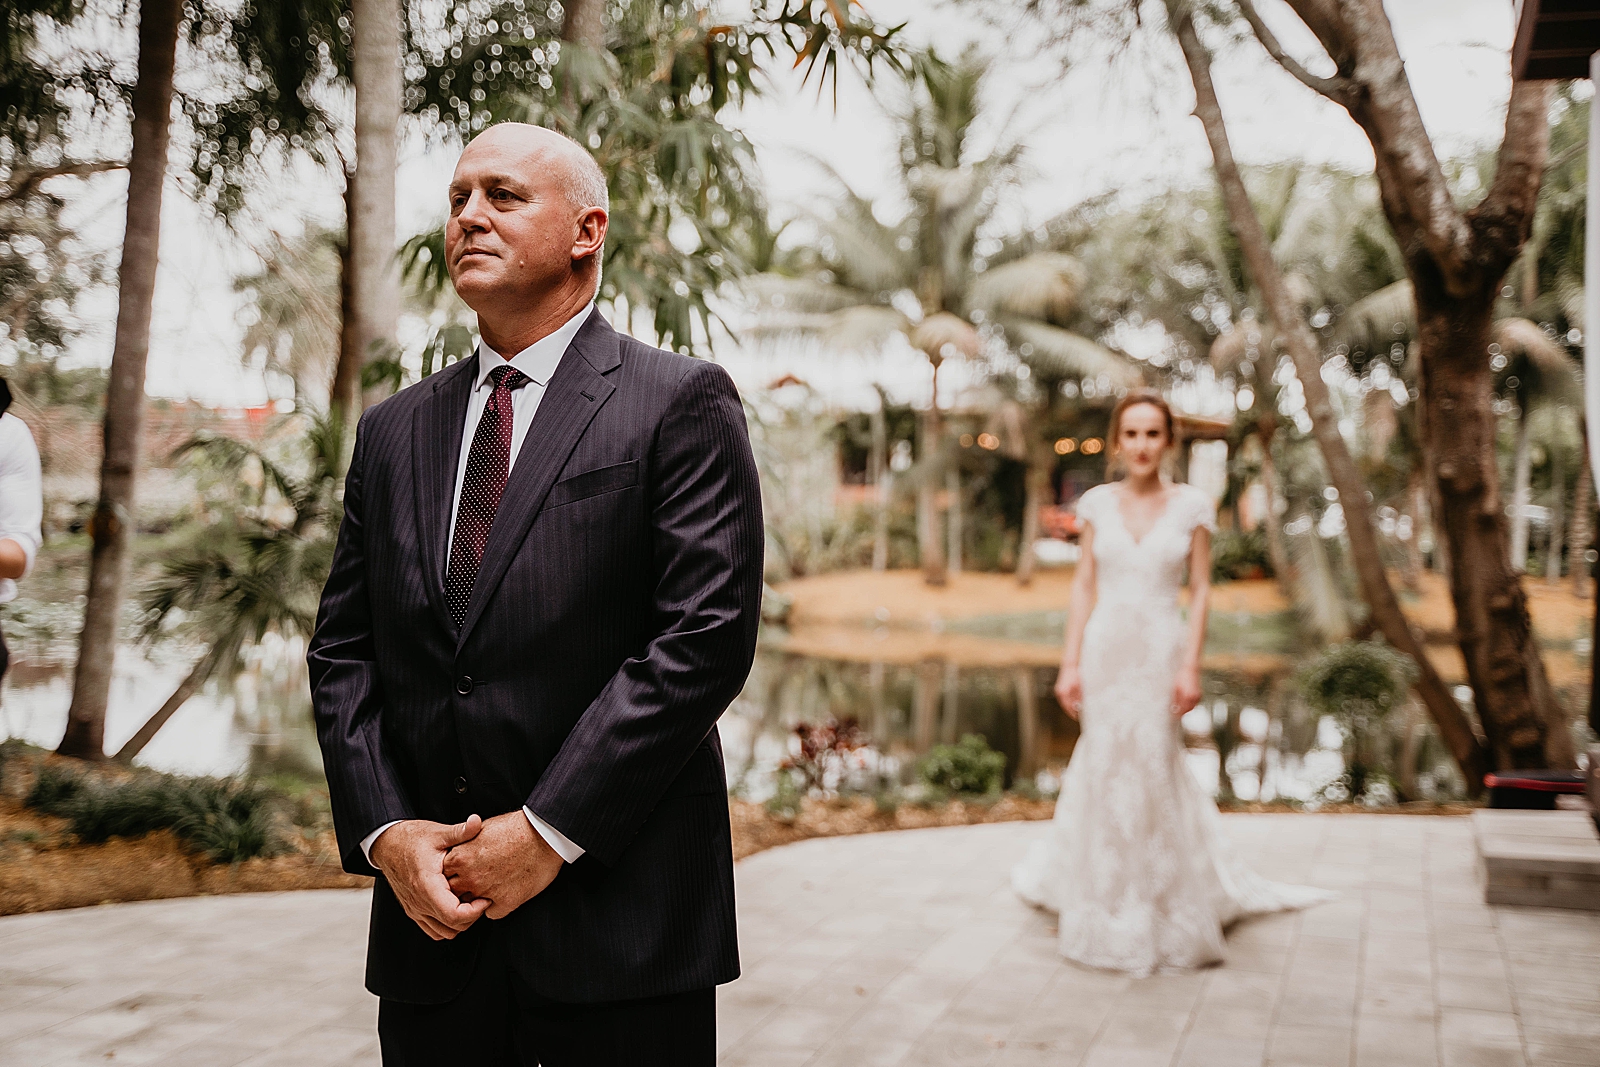 Bride approaching Father for First Look Living Sculptures Sanctuary Wedding Photography captured by South Florida Wedding Photographer Krystal Capone Photography 